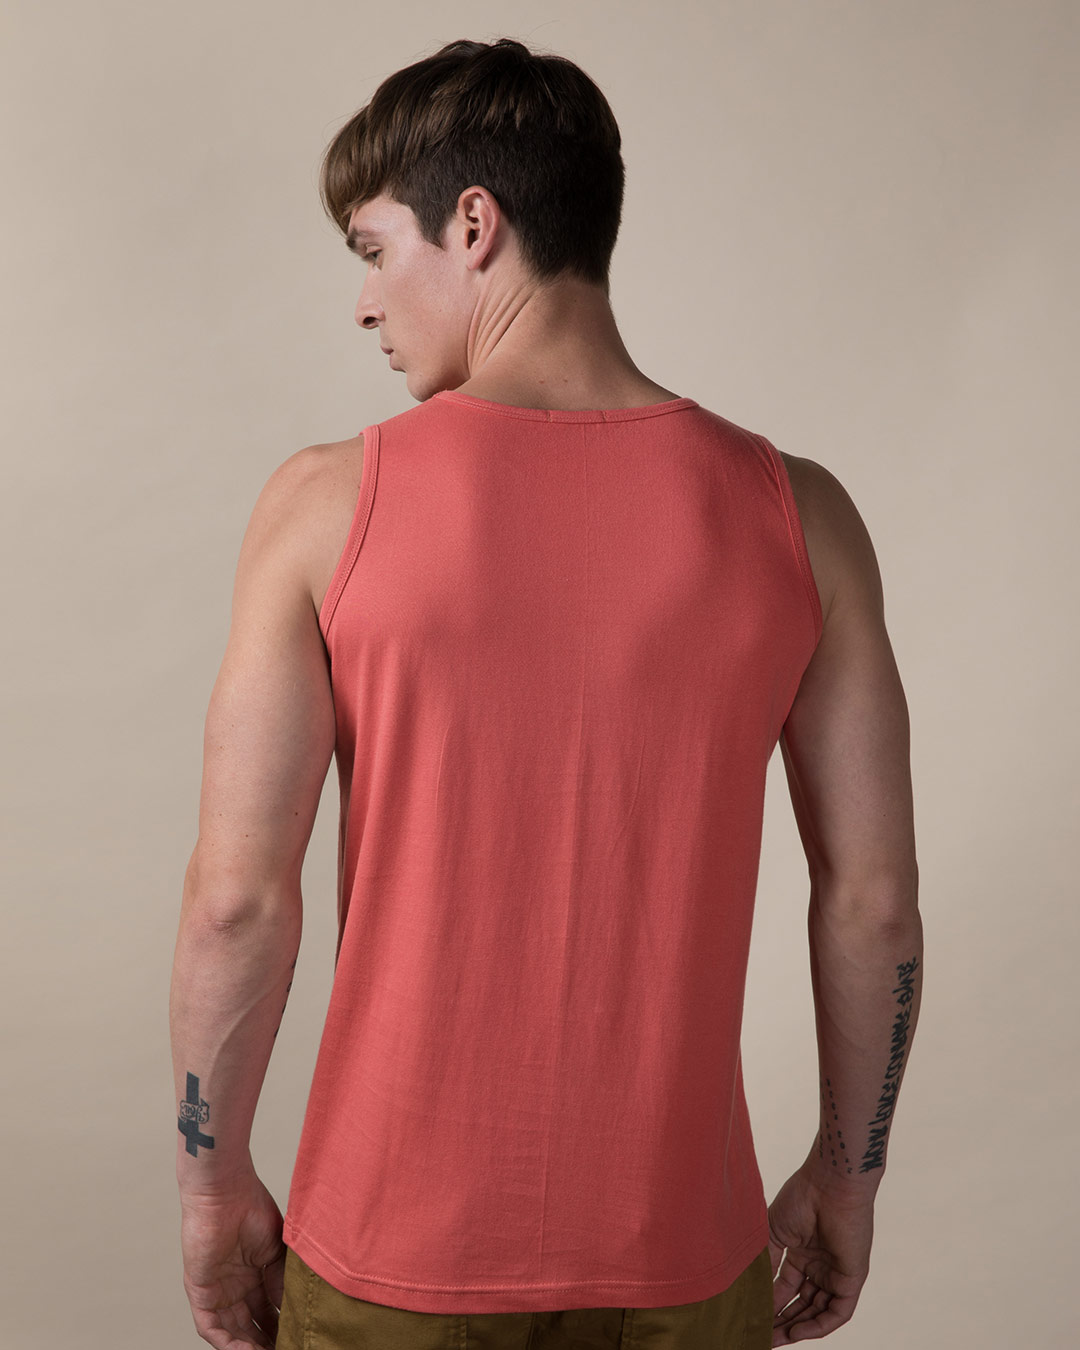 Shop May Be Wrong Vest-Back